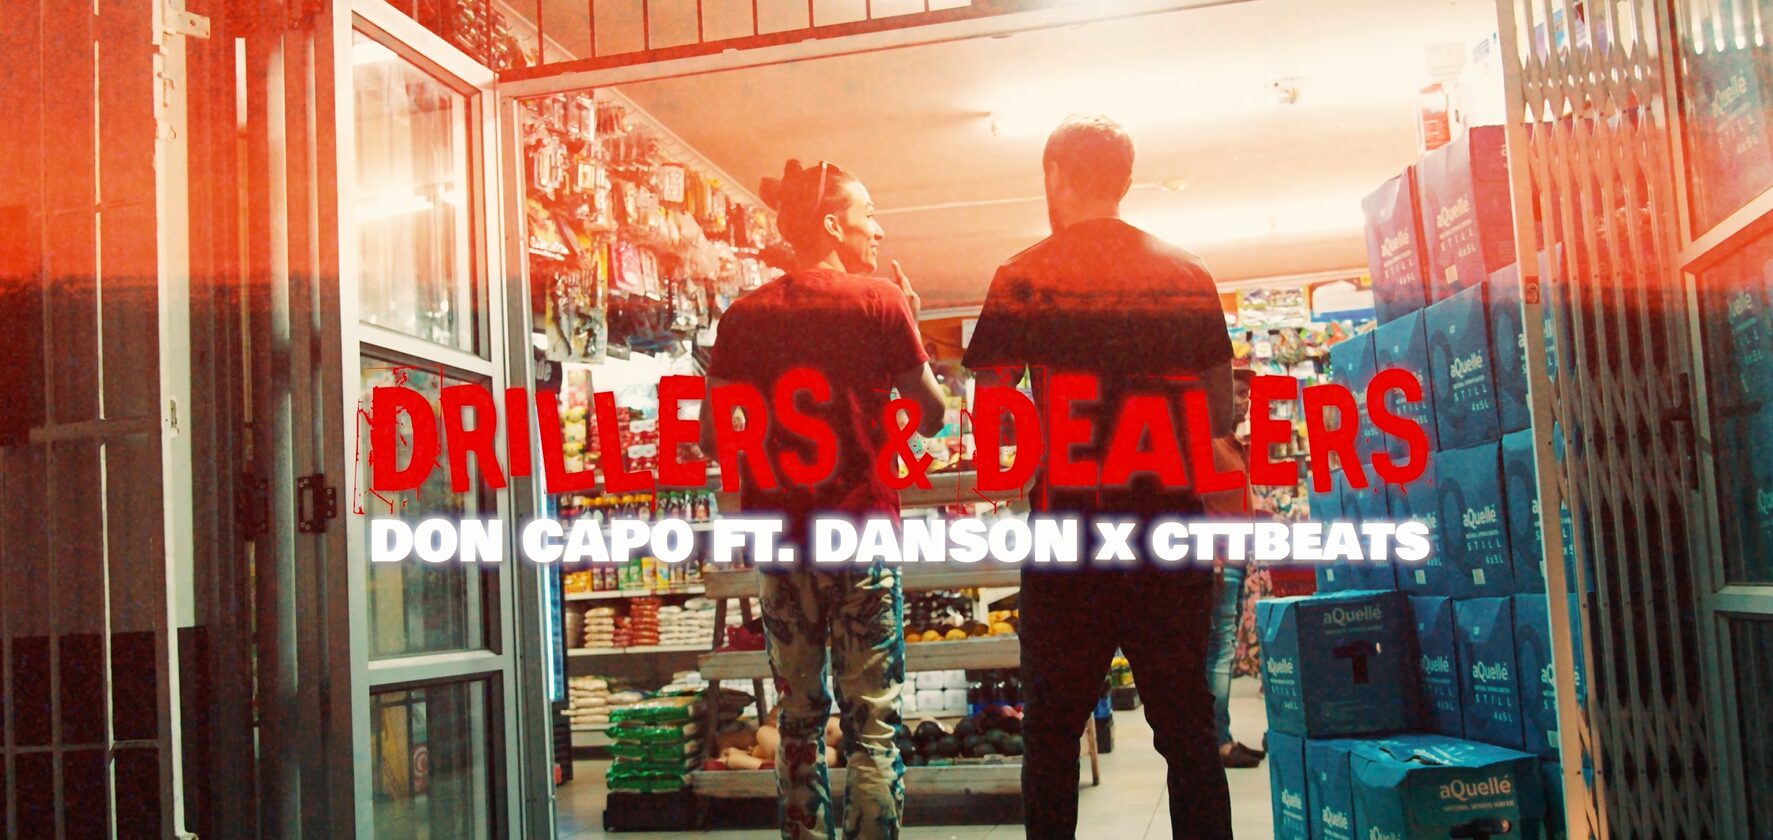 CTT BEATS X DON CAPO X DANSON – DRILLERS AND DEALERS (OFFICIAL MUSIC VIDEO)